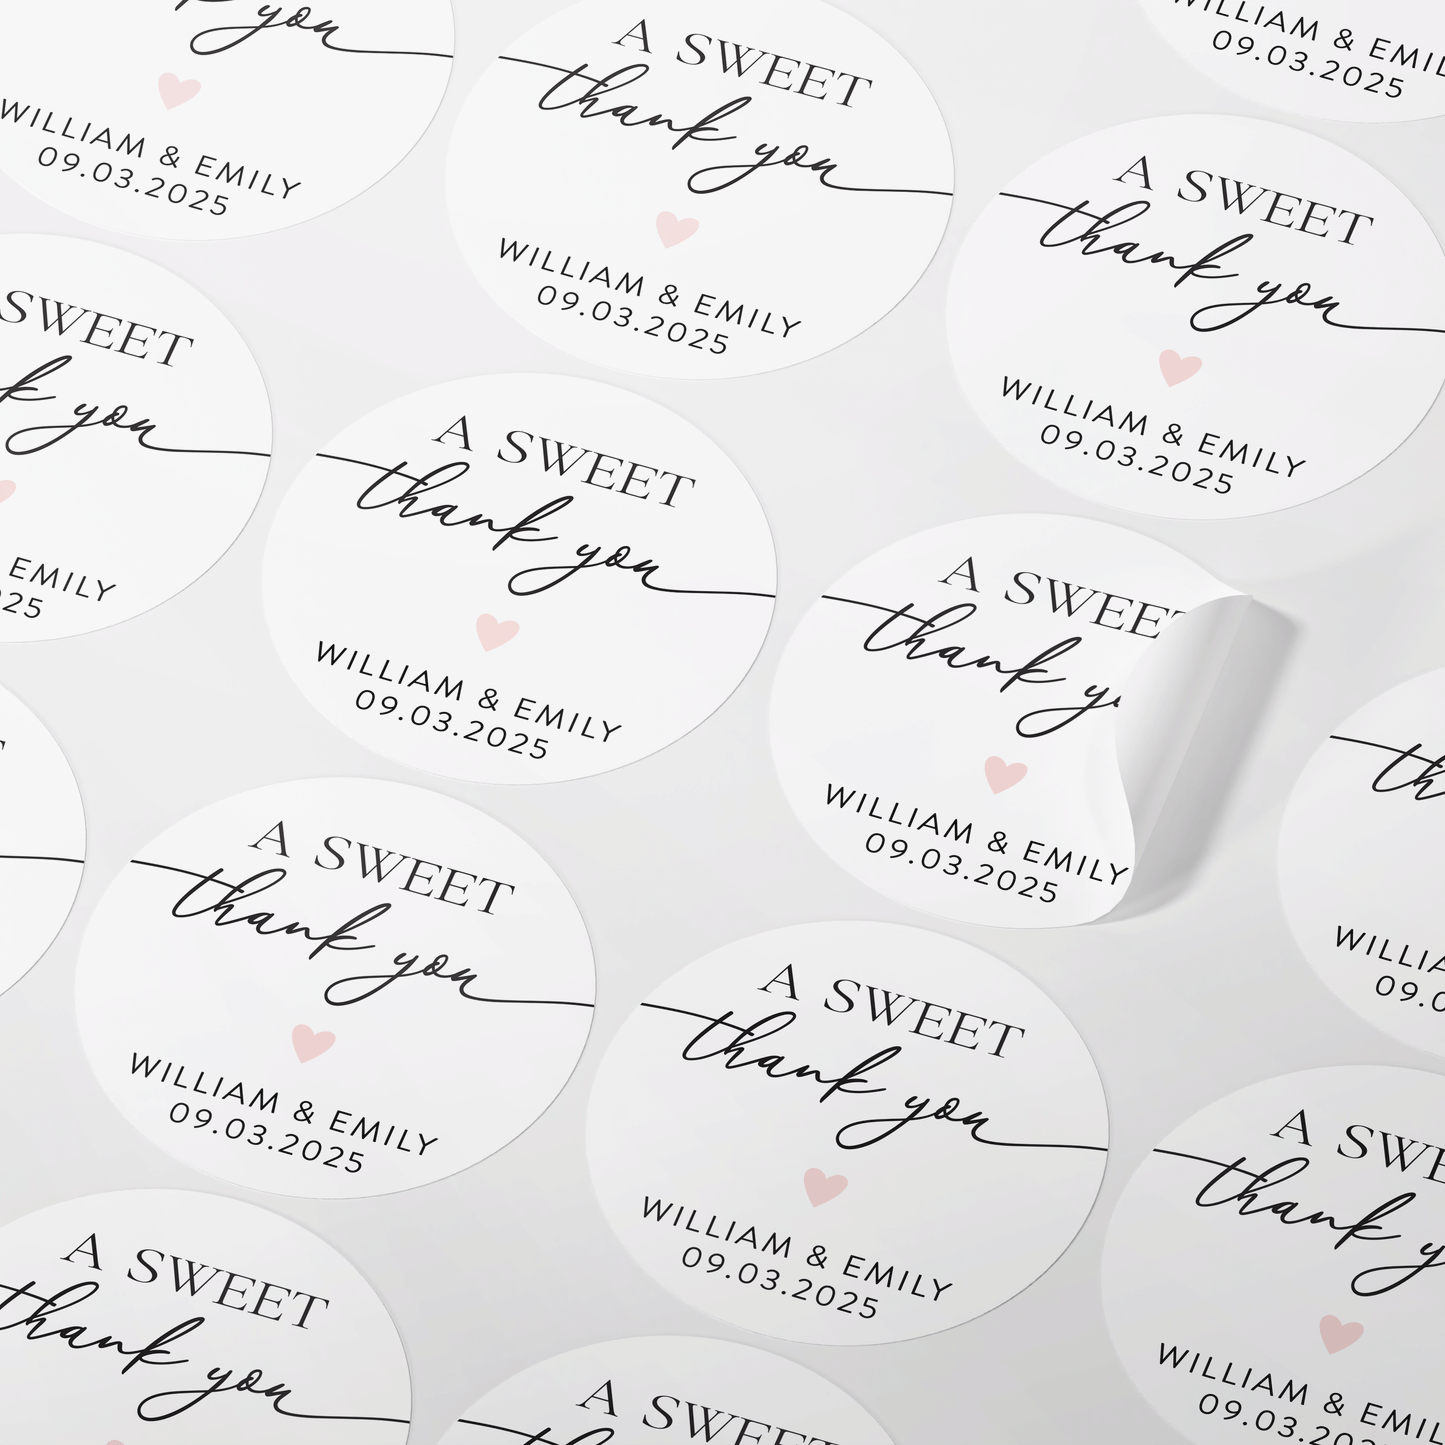 Personalised A Sweet Thank You Stickers